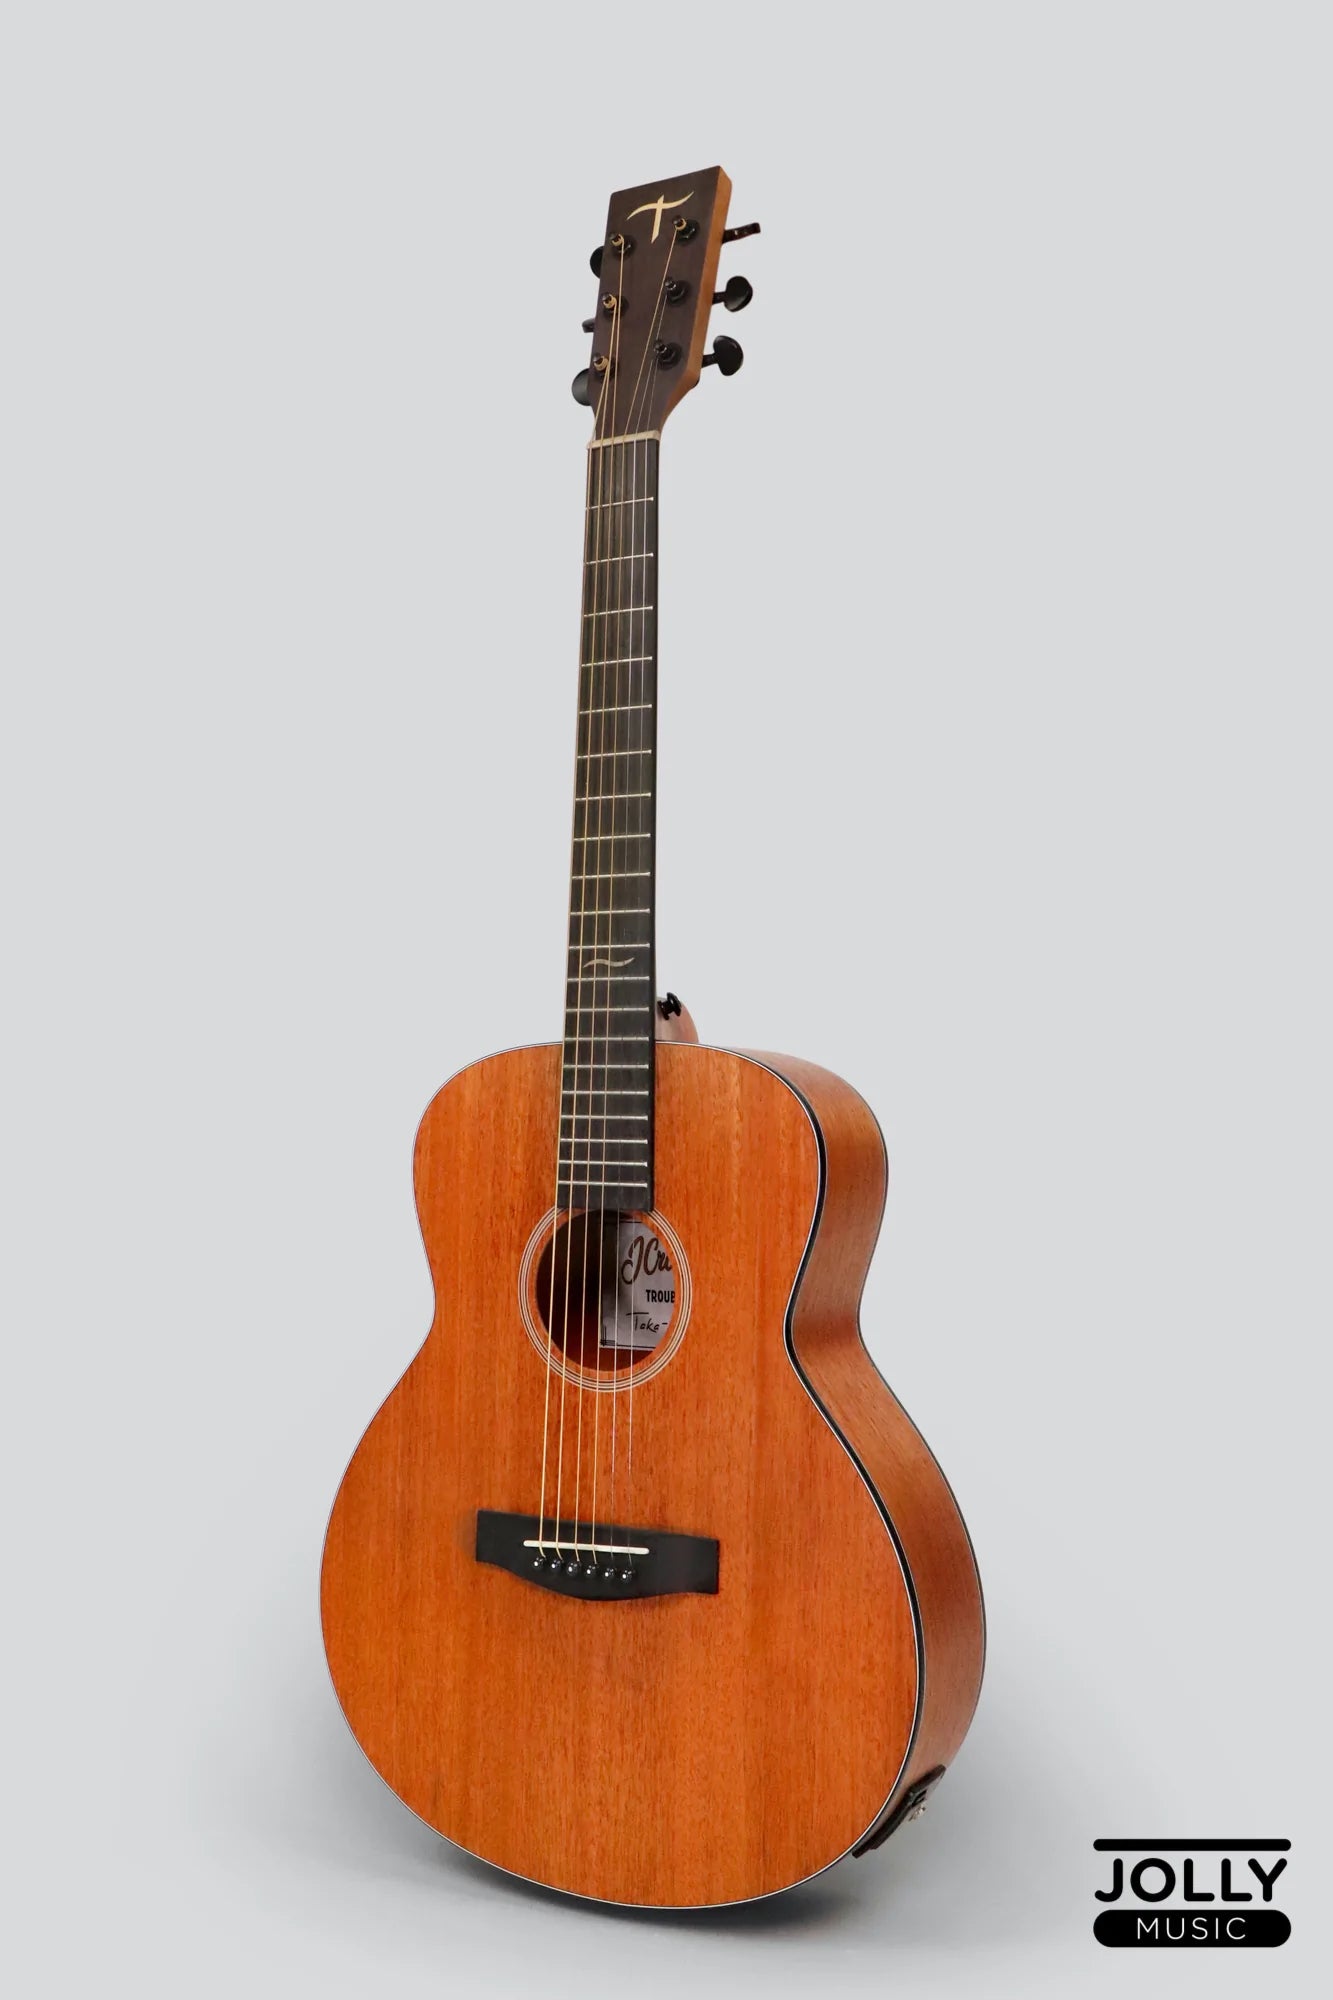 JCraft Troubadour Taka Mini GS EQ 7/8 All-Mahogany Acoustic Guitar with Pickups and soft case